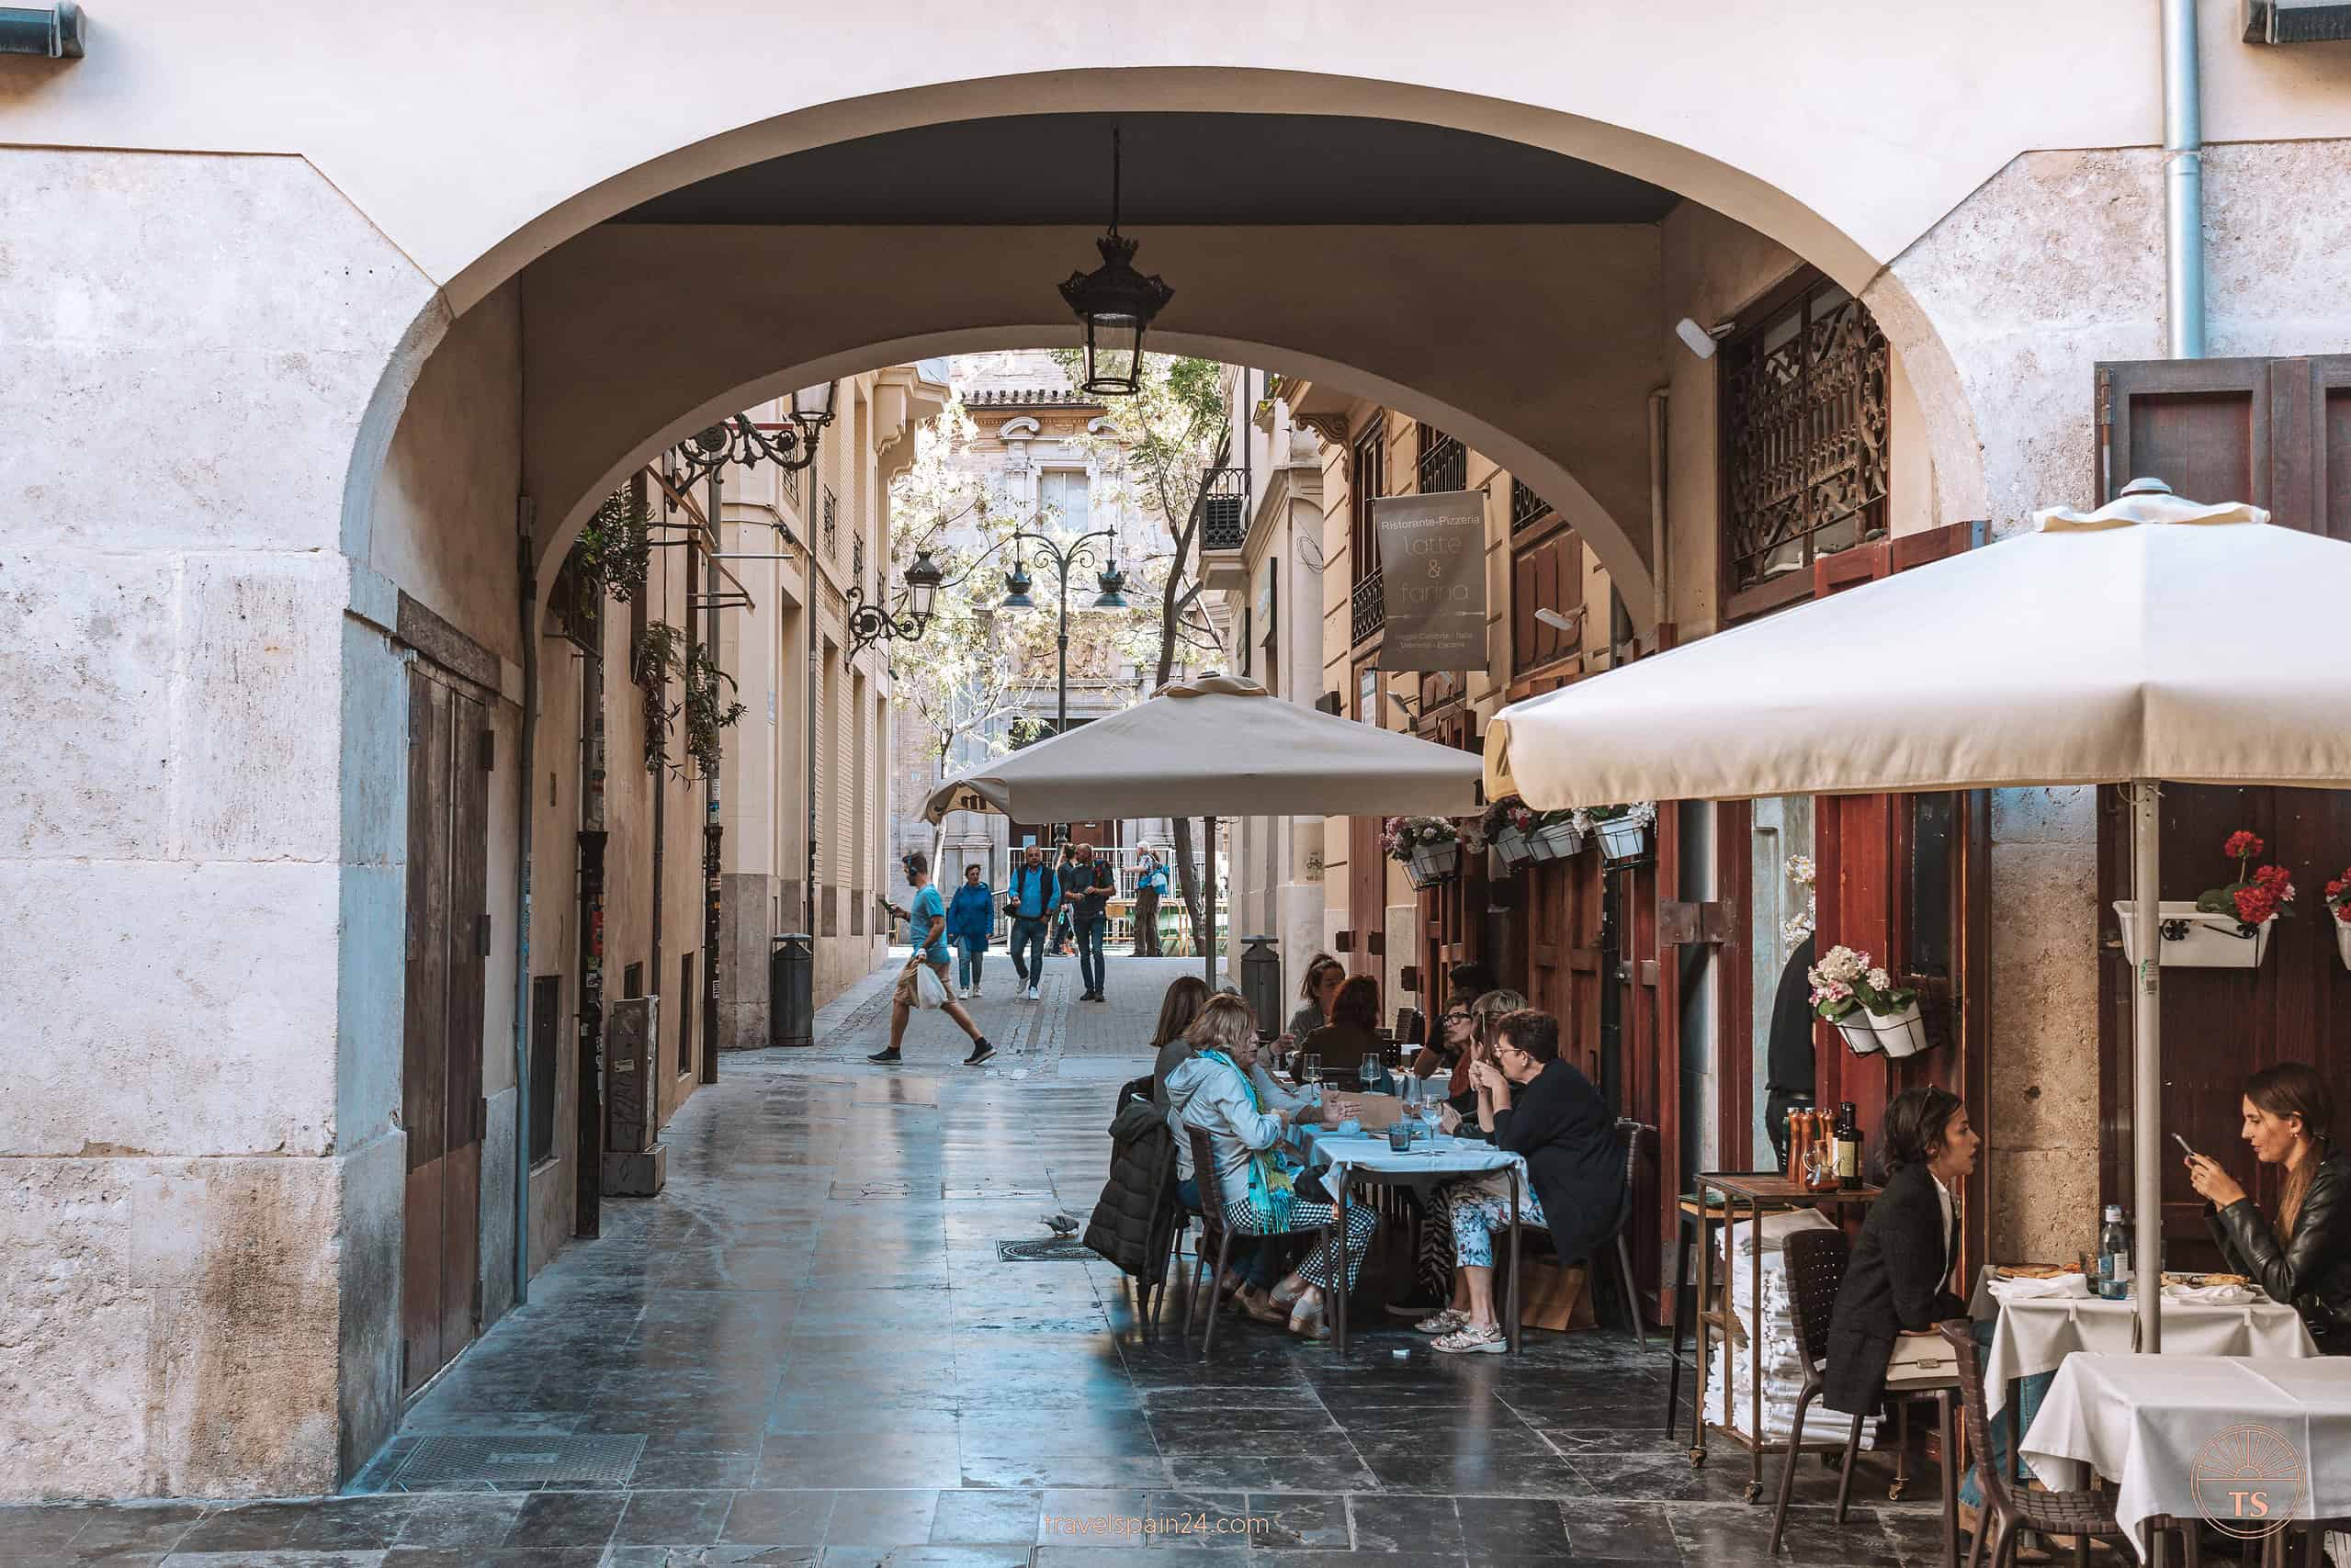 View of a bustling square in Valencia, with people enjoying time under an arched tunnel at café terraces, capturing the lively urban atmosphere.